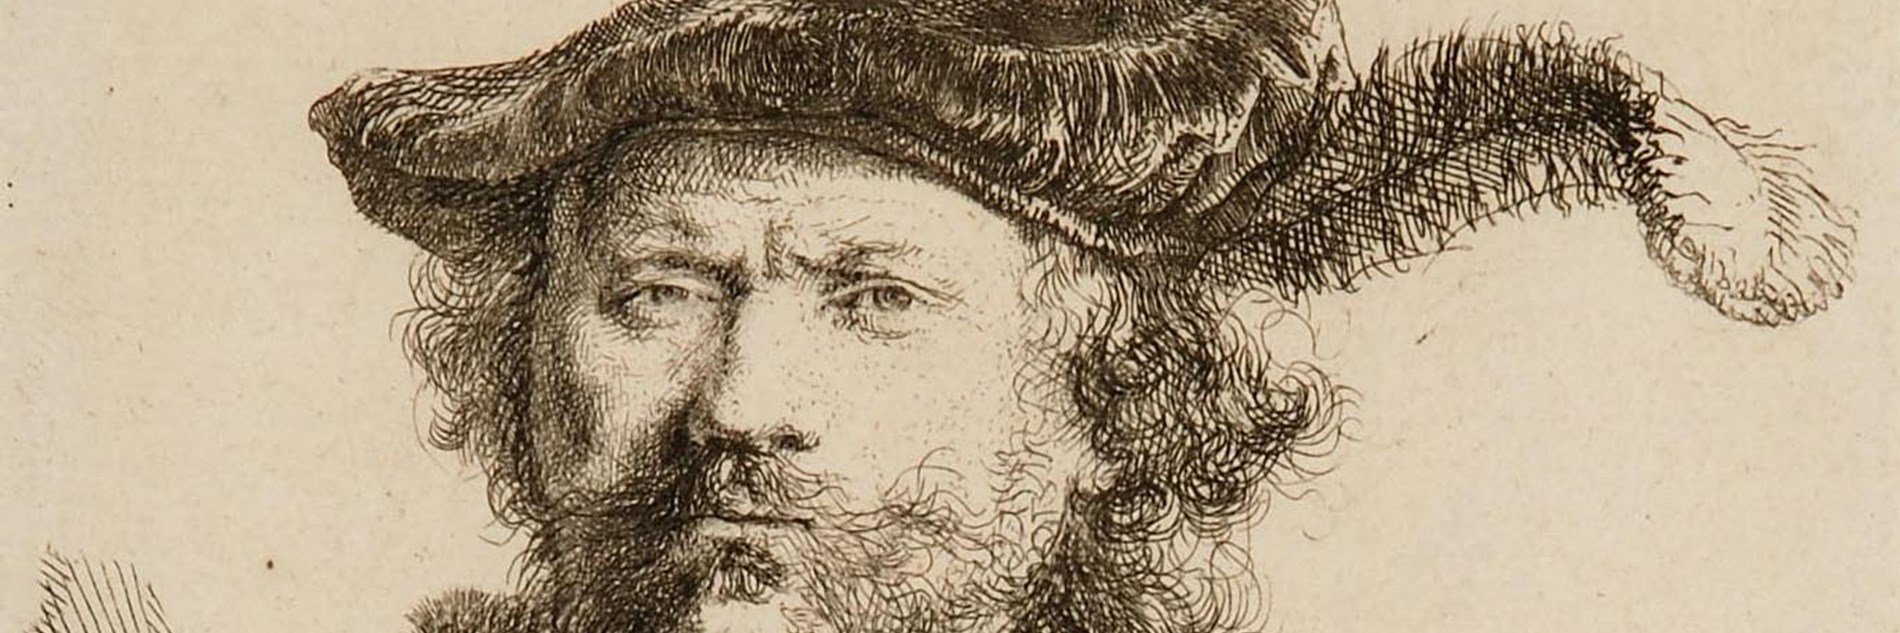 A drawing of a bearded man in 17th century dress. He wear a cloth cap with a feather in it and a jacket with a ruffed collar.